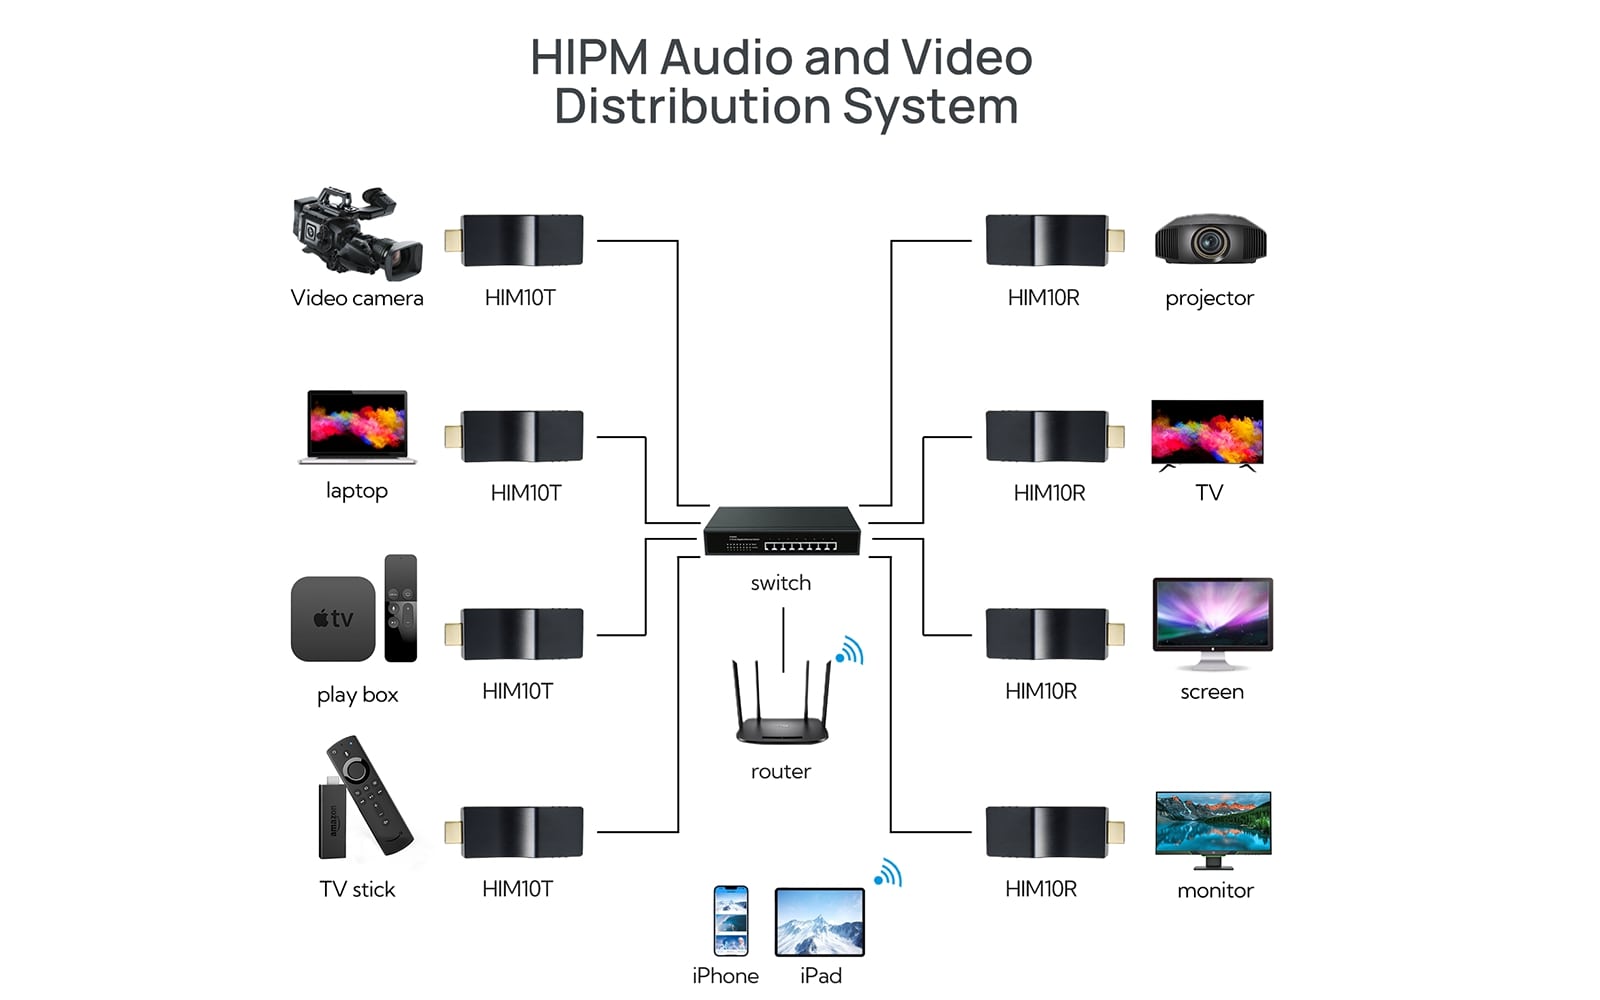 HIPM audio and video distribution system